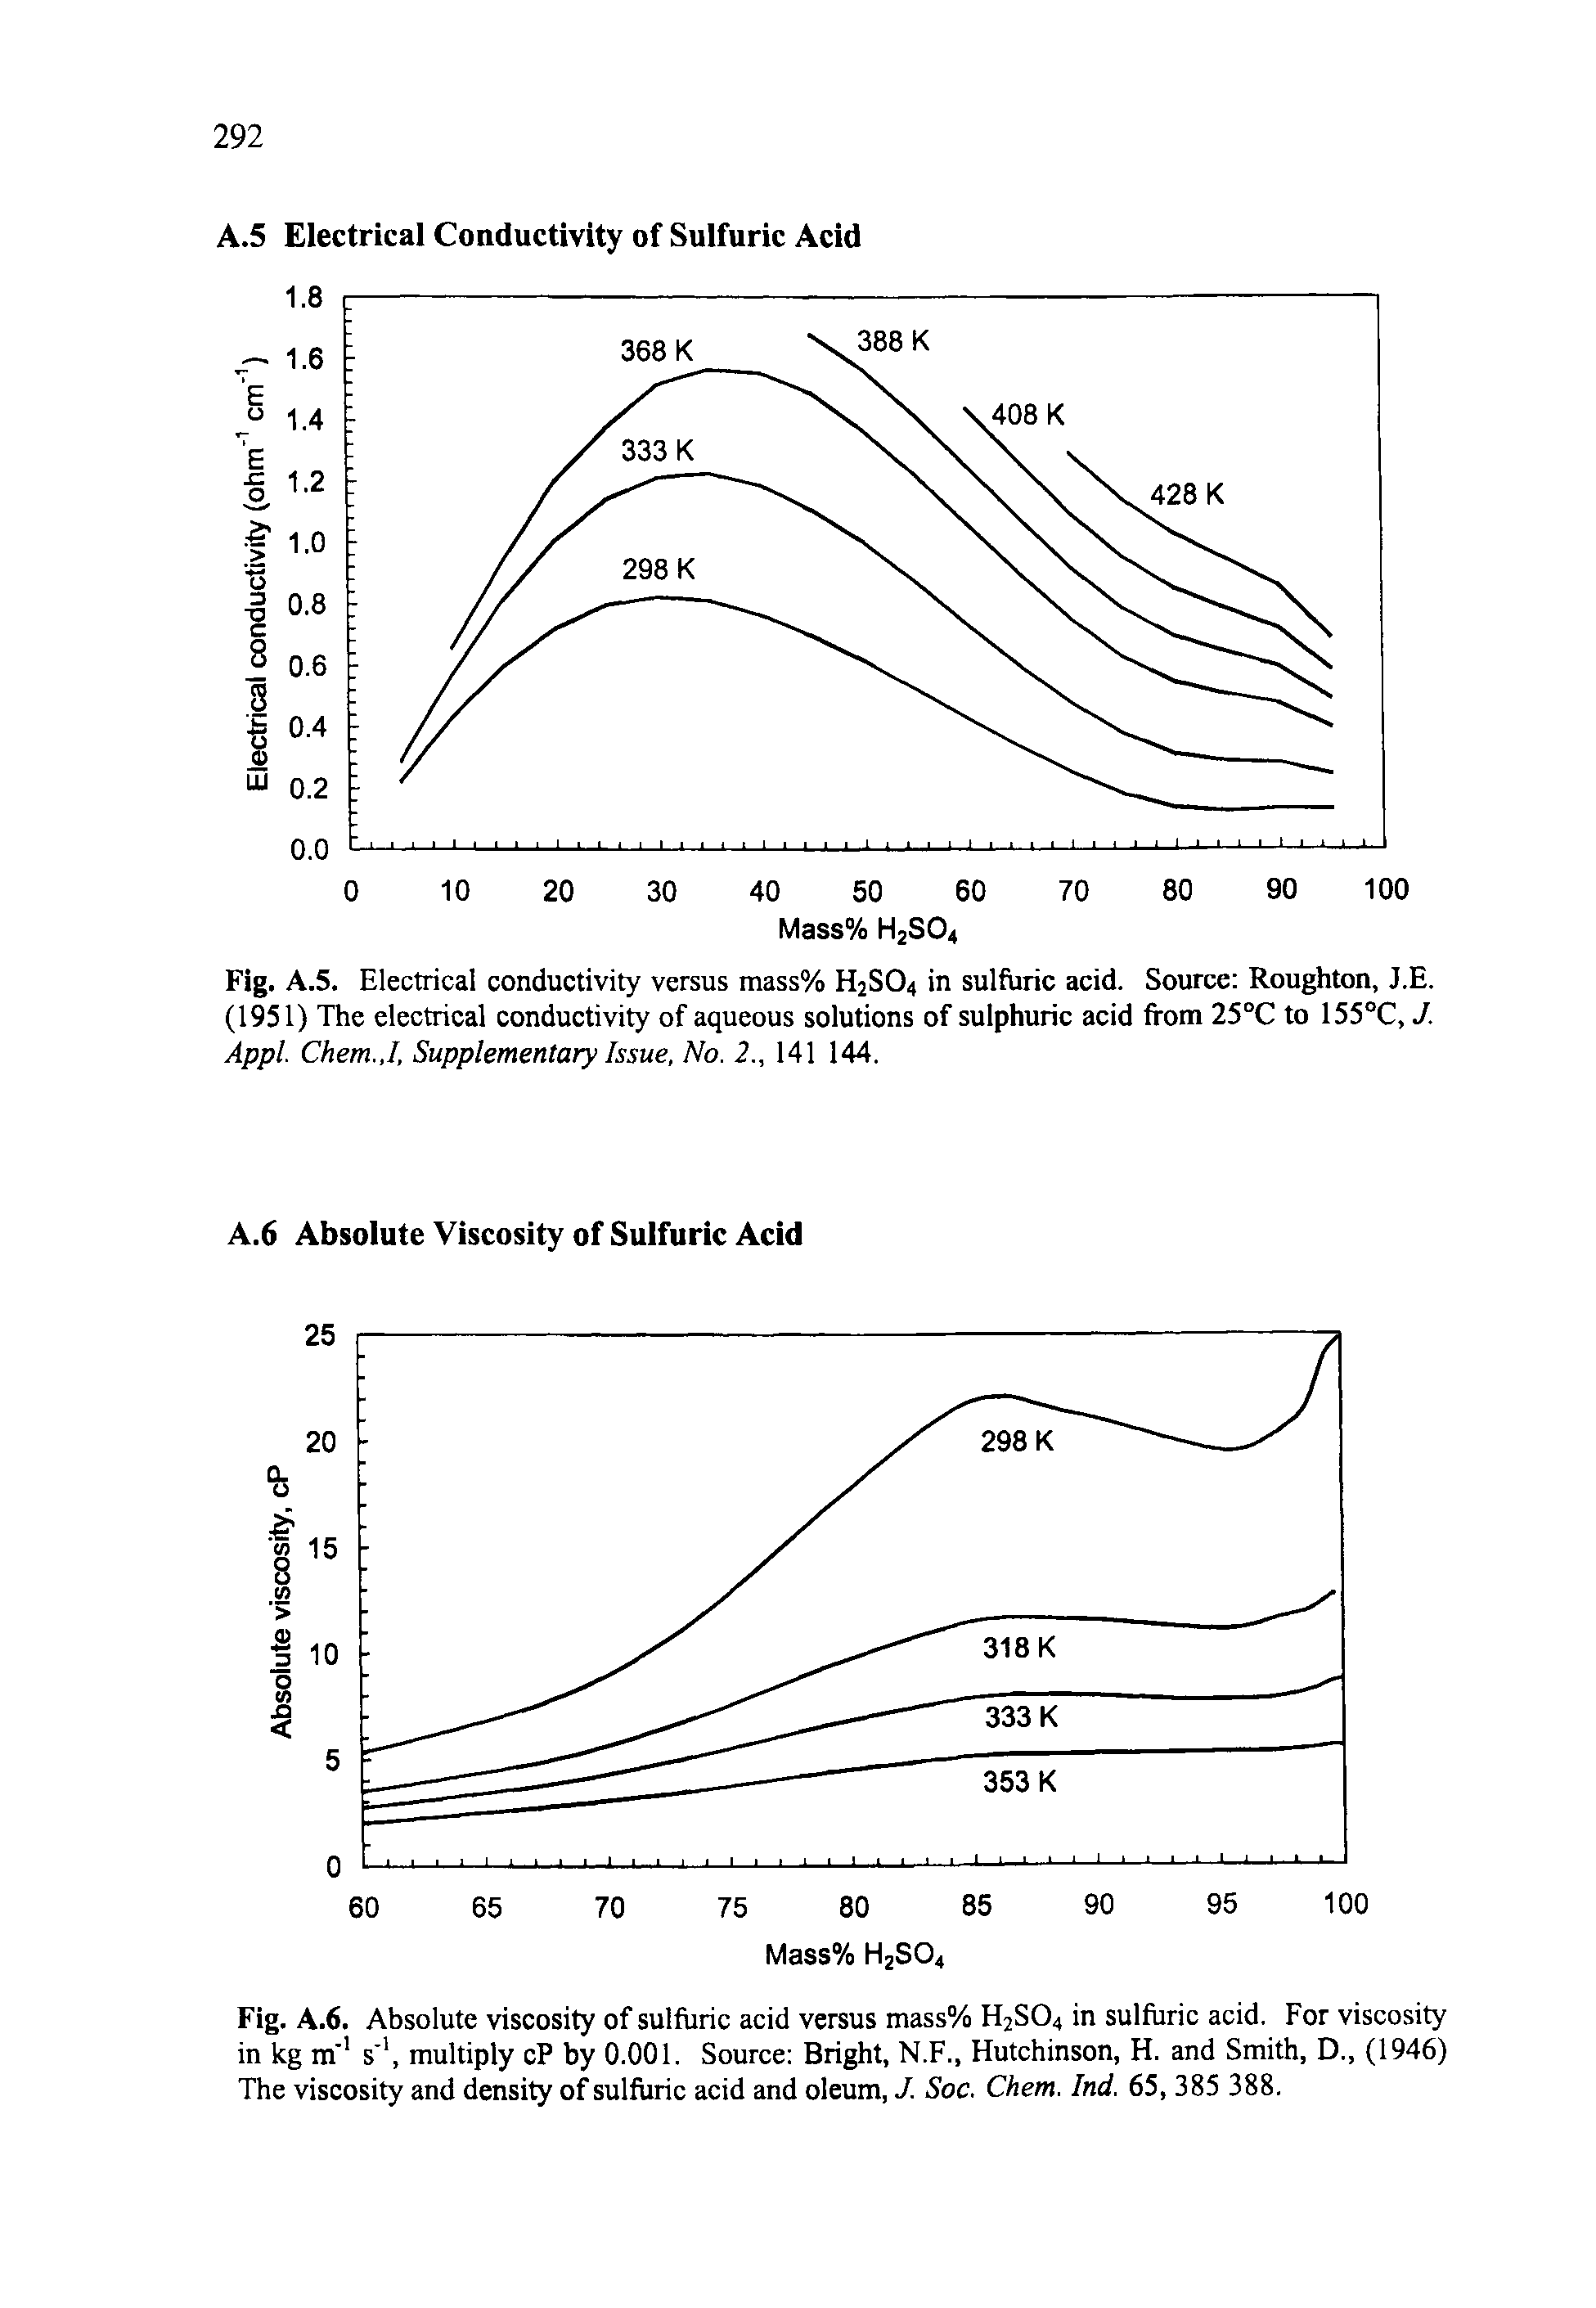 Fig. A.6. Absolute viscosity of sulfuric acid versus mass% H2S04 in sulfuric acid. For viscosity in kg m 1 s 1, multiply cP by 0.001. Source Bright, N.F., Hutchinson, H. and Smith, D., (1946) The viscosity and density of sulfuric acid and oleum, J. Soc. Chem. Ind. 65, 385 388.